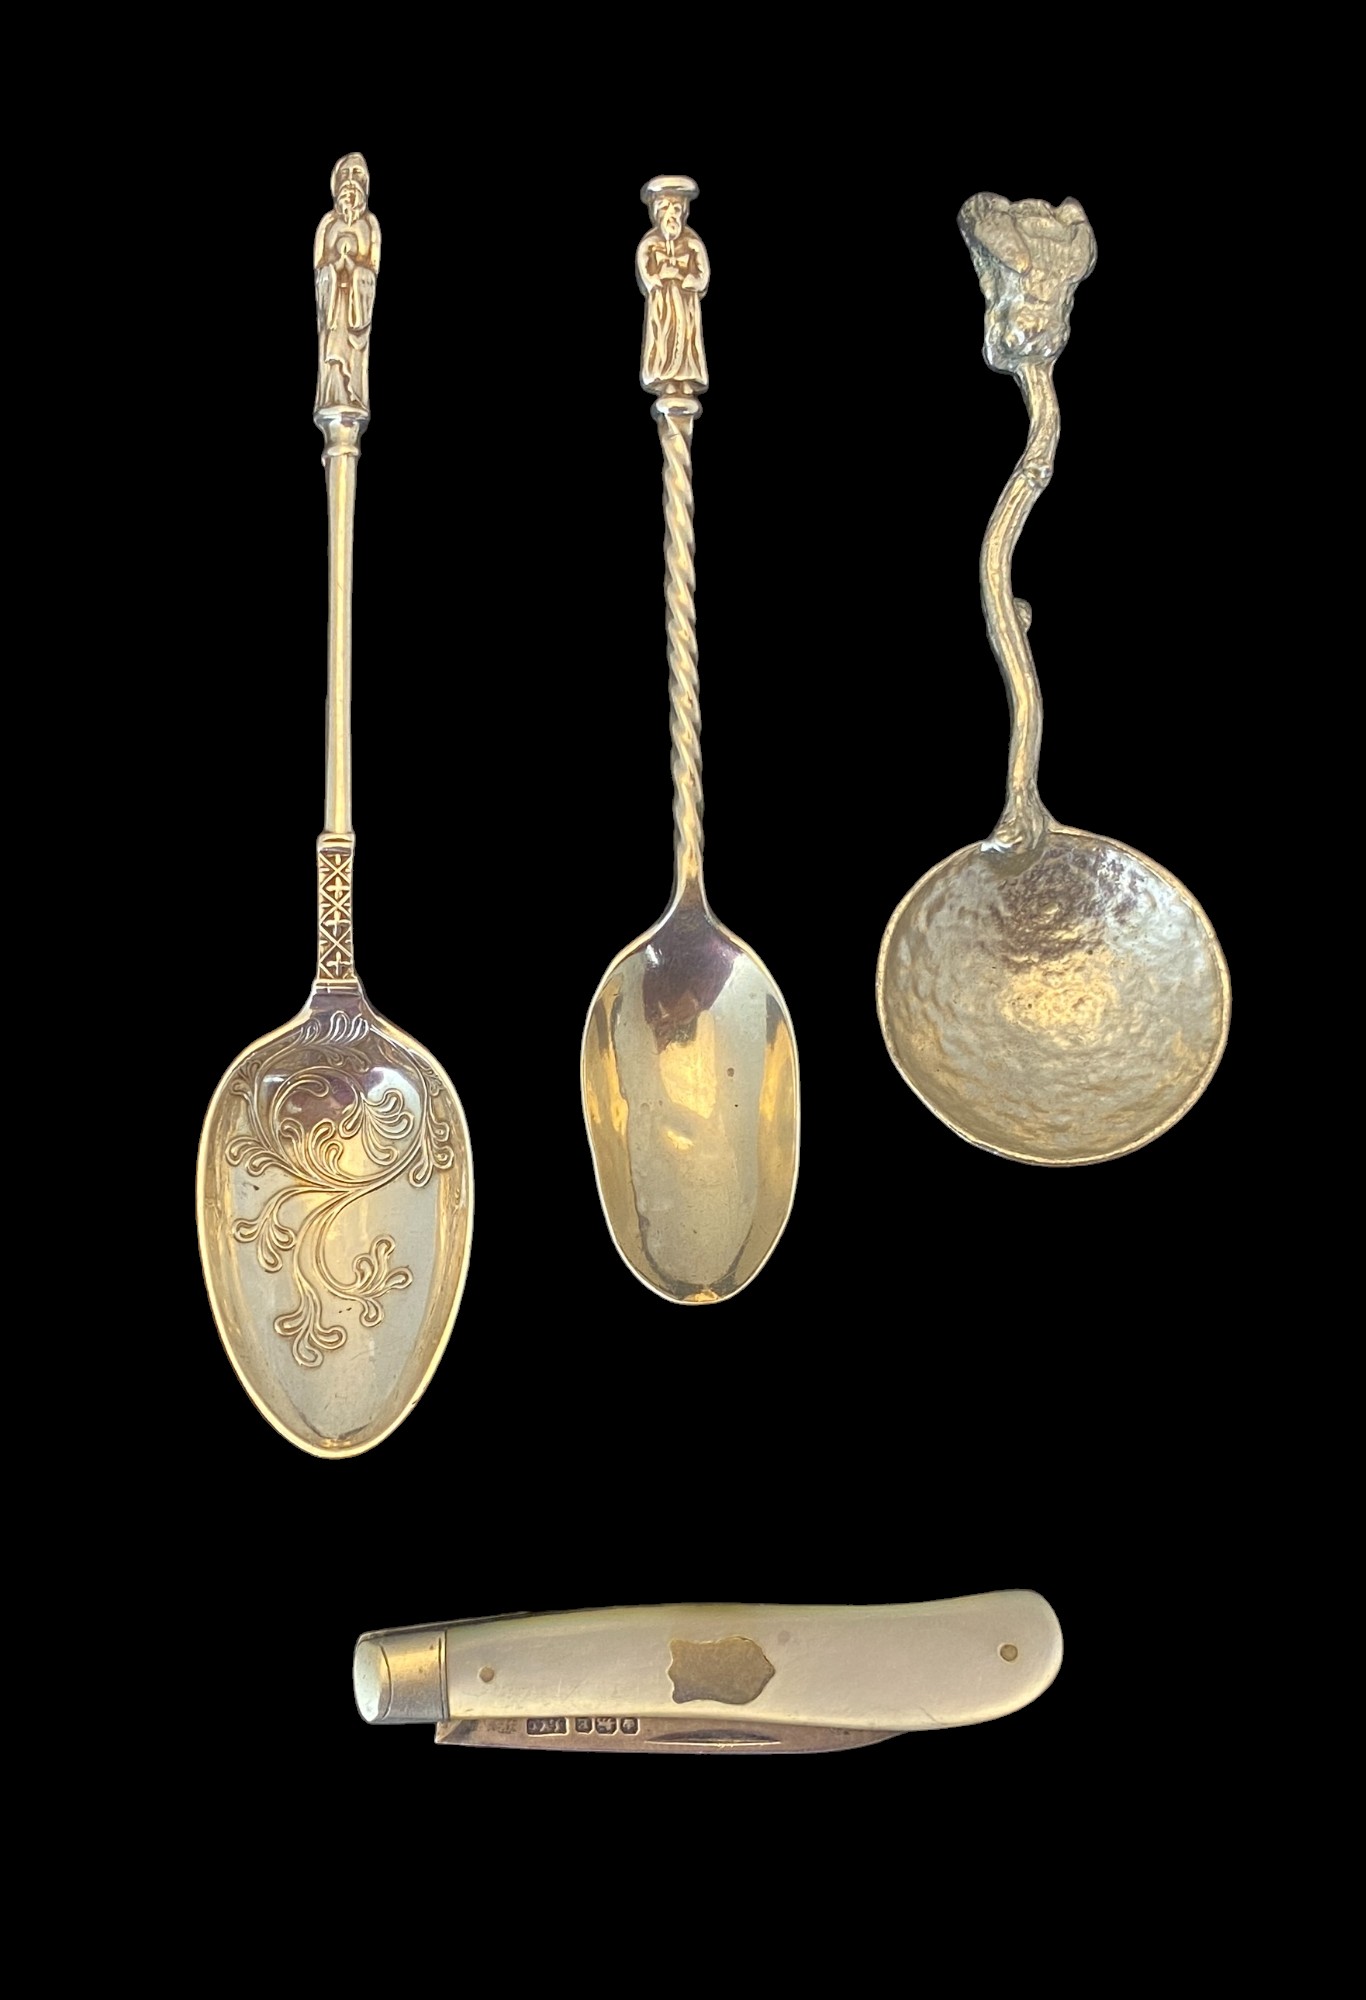 Two silver caddy spoons, another caddy spoon and a silver and mother-of-pearl fruit knife - Image 6 of 10